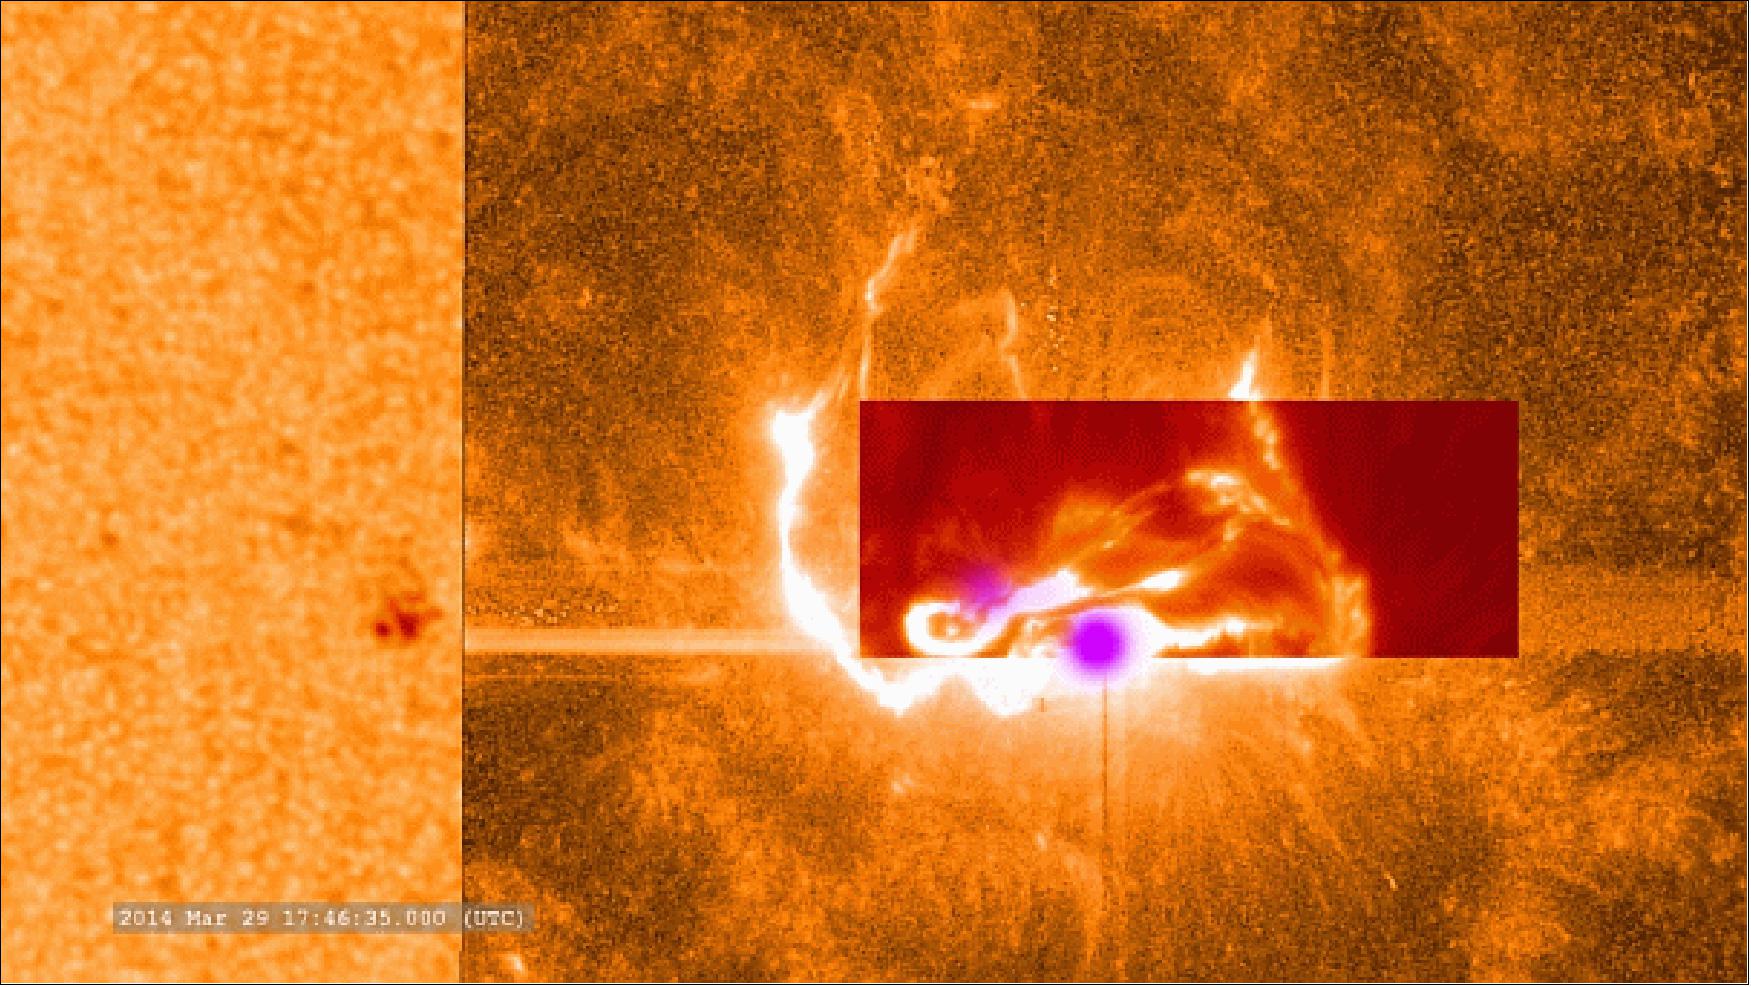 Figure 19: This combined image shows the March 29, 2014, X-class flare as seen through the eyes of different observatories. SDO is on the bottom/left, which helps show the position of the flare on the sun. The darker orange square is IRIS data. The red rectangular inset is from Sacramento Peak. The violet spots show the flare's footpoints from RHESSI (image credit: NASA/GSFC)